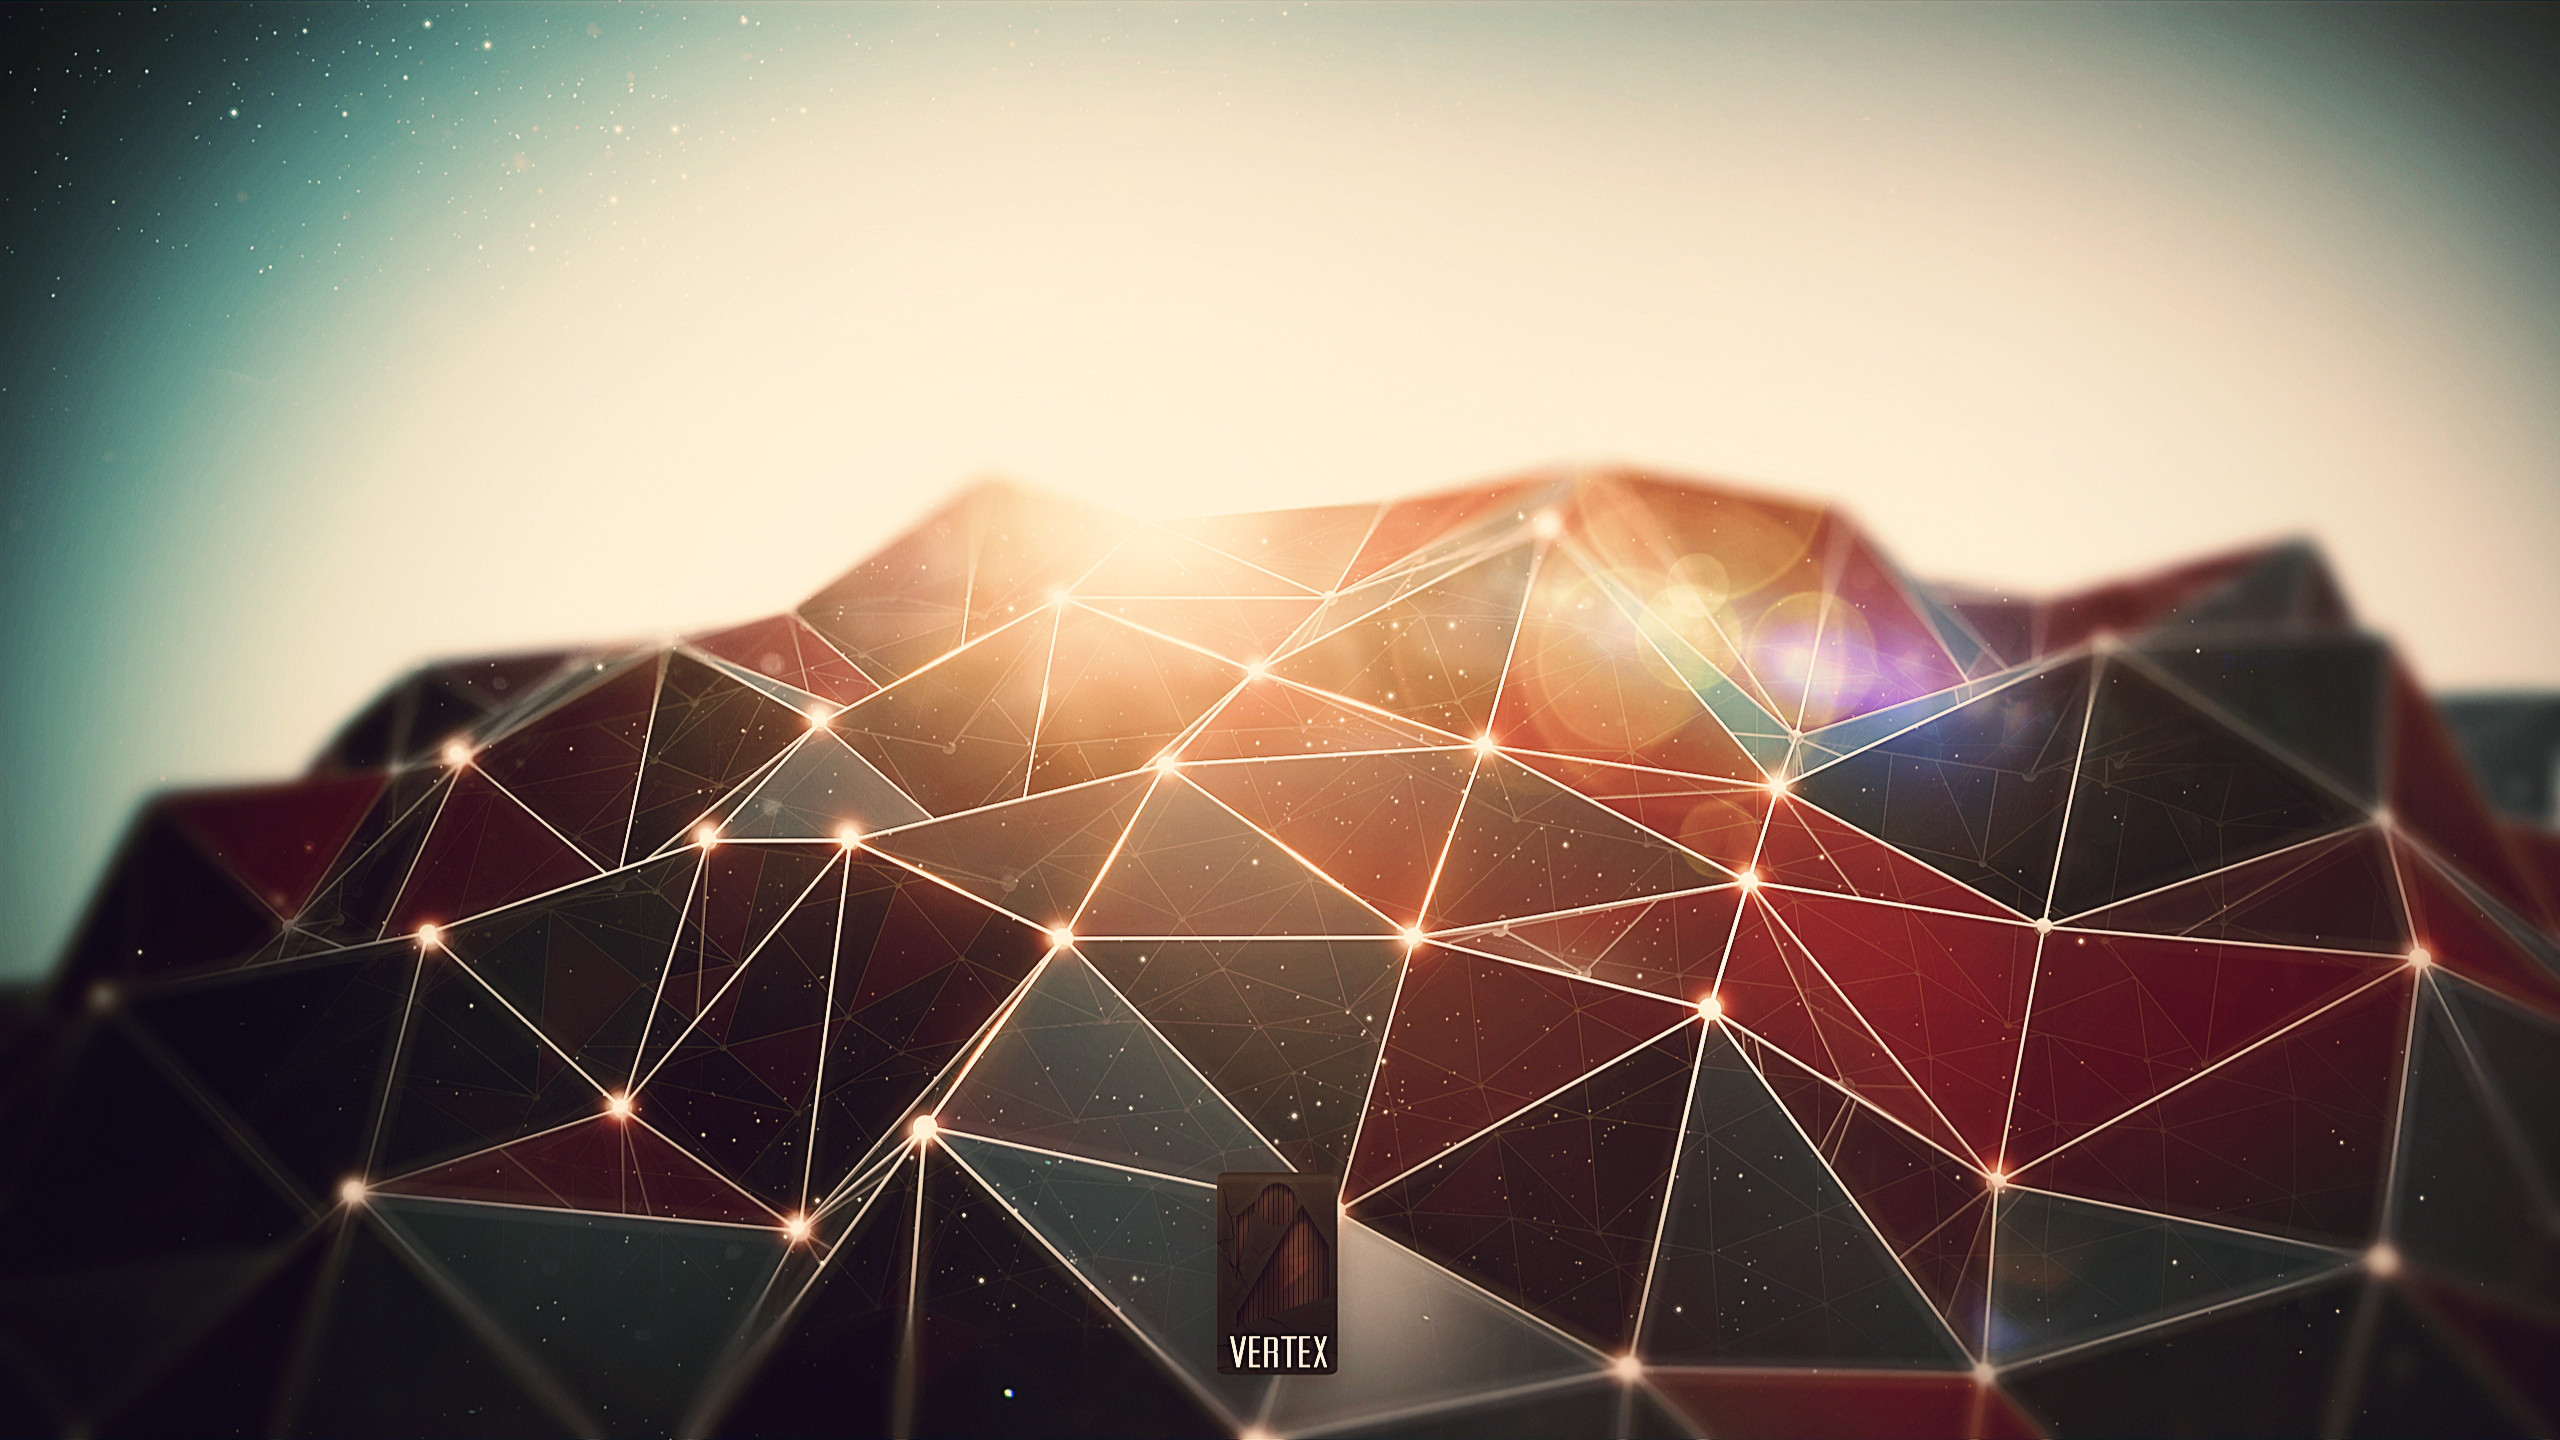 Abstract wallpaper geometric shapes wallpapers by Magyar Lszl lacza.deviantart.com /